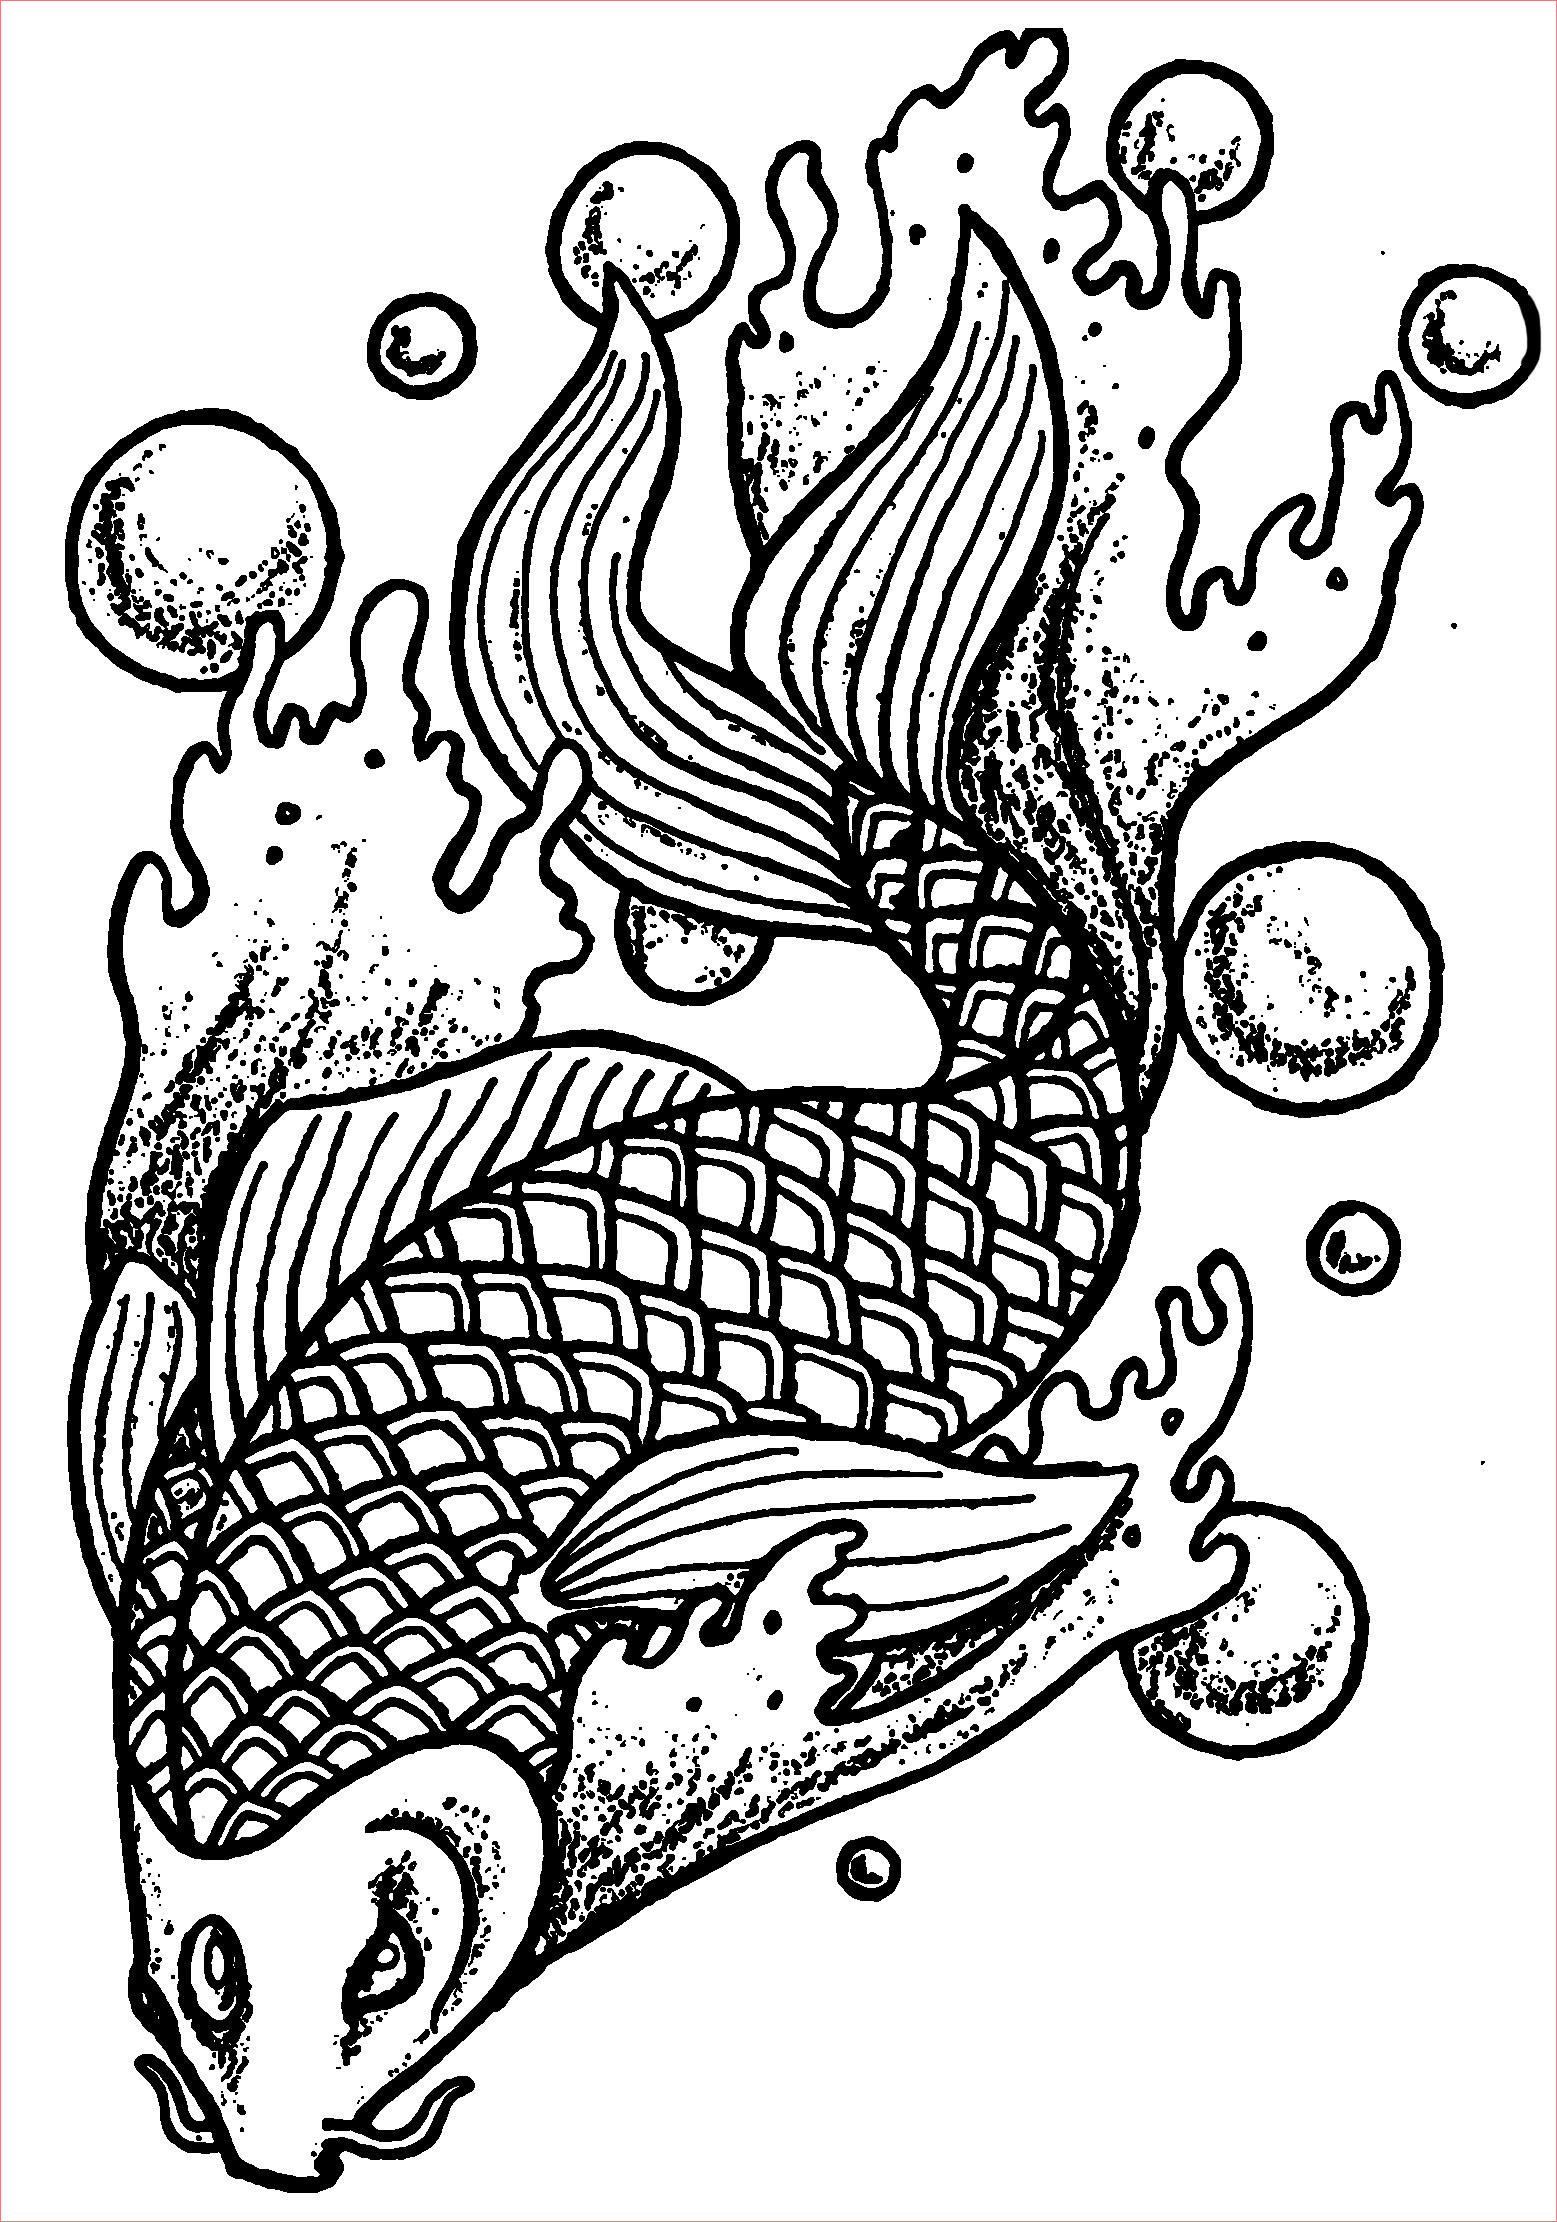 image=fishes coloring page fish and bubbles 1